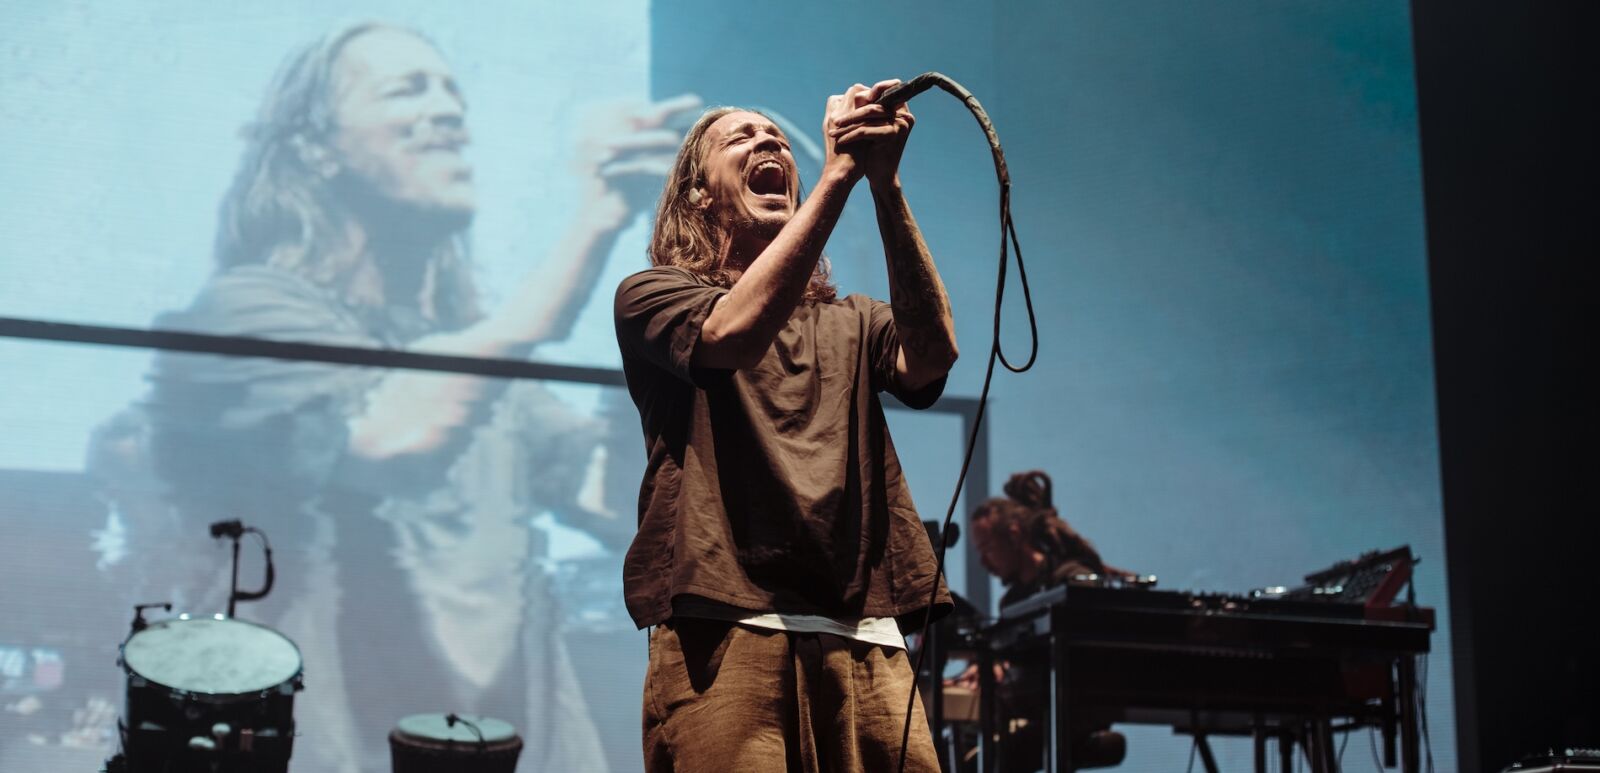 Incubus performs live